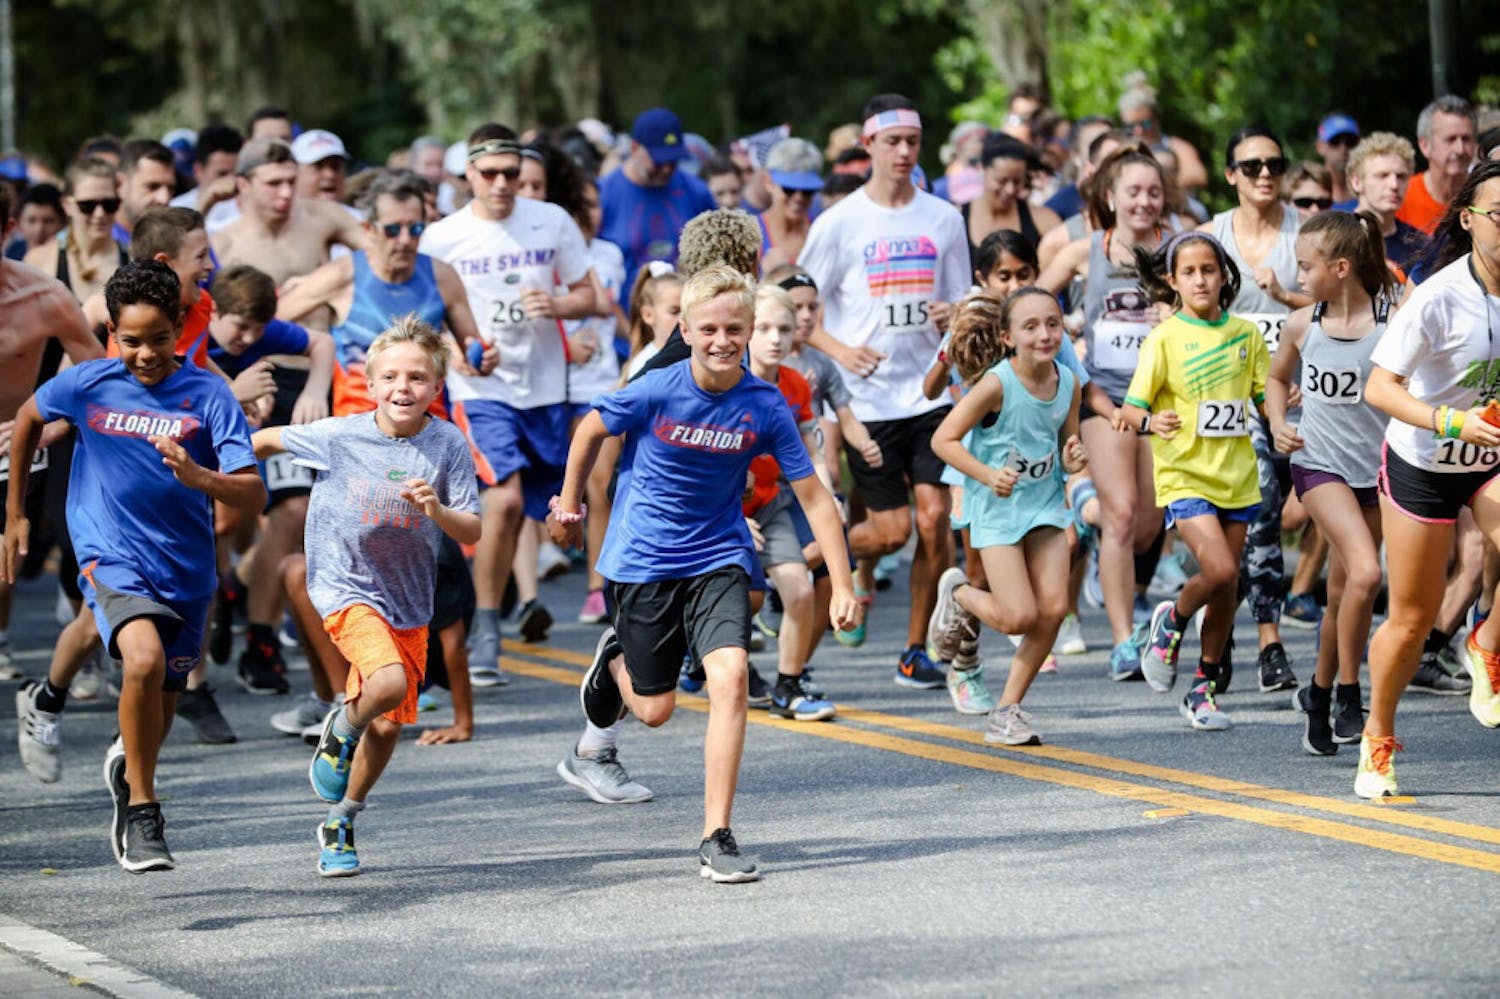 Participants run in the Gator Gallop 5k,&nbsp;one of the various events that takes place during homecoming week at UF in Fall 2019.&nbsp; (Photographer: Adler Garfield, 2019 Director of Photography)